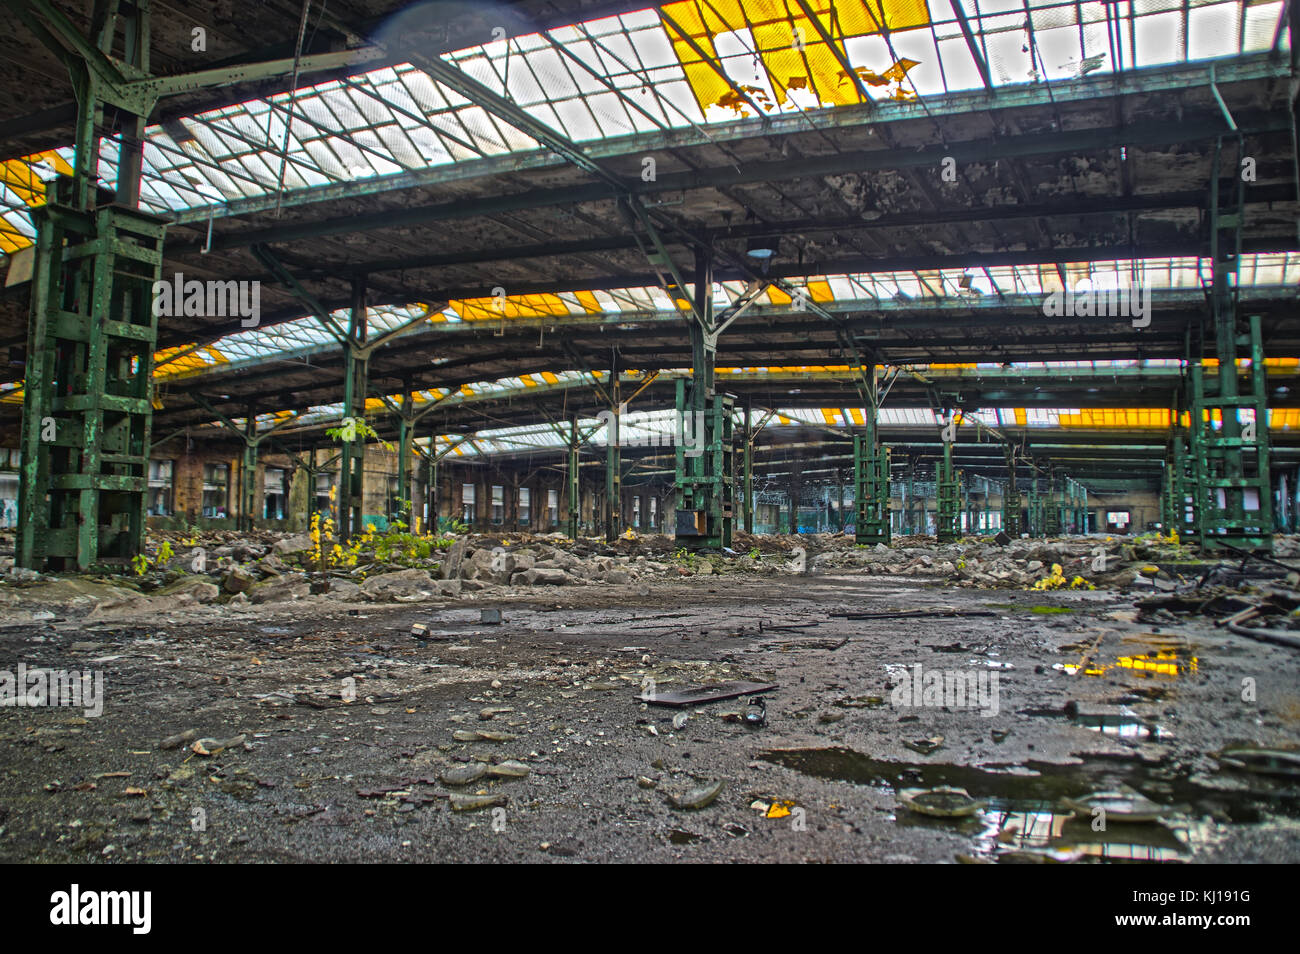 Abandoned old factory hall with windows in roof. Large space in forgotten industrial interior. Stock Photo